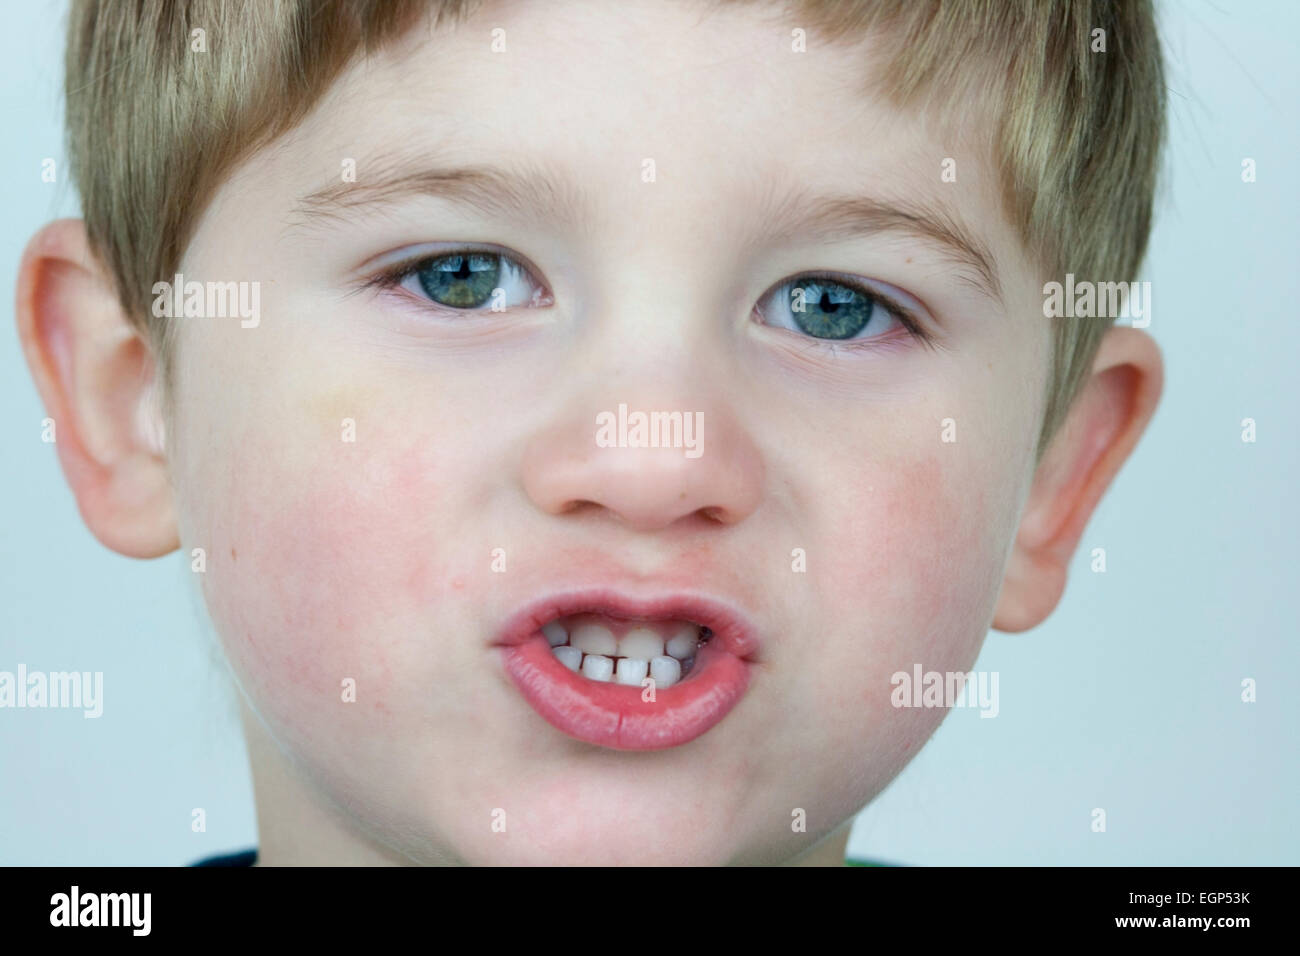 5 year old boy face shots close up talking expression Stock Photo